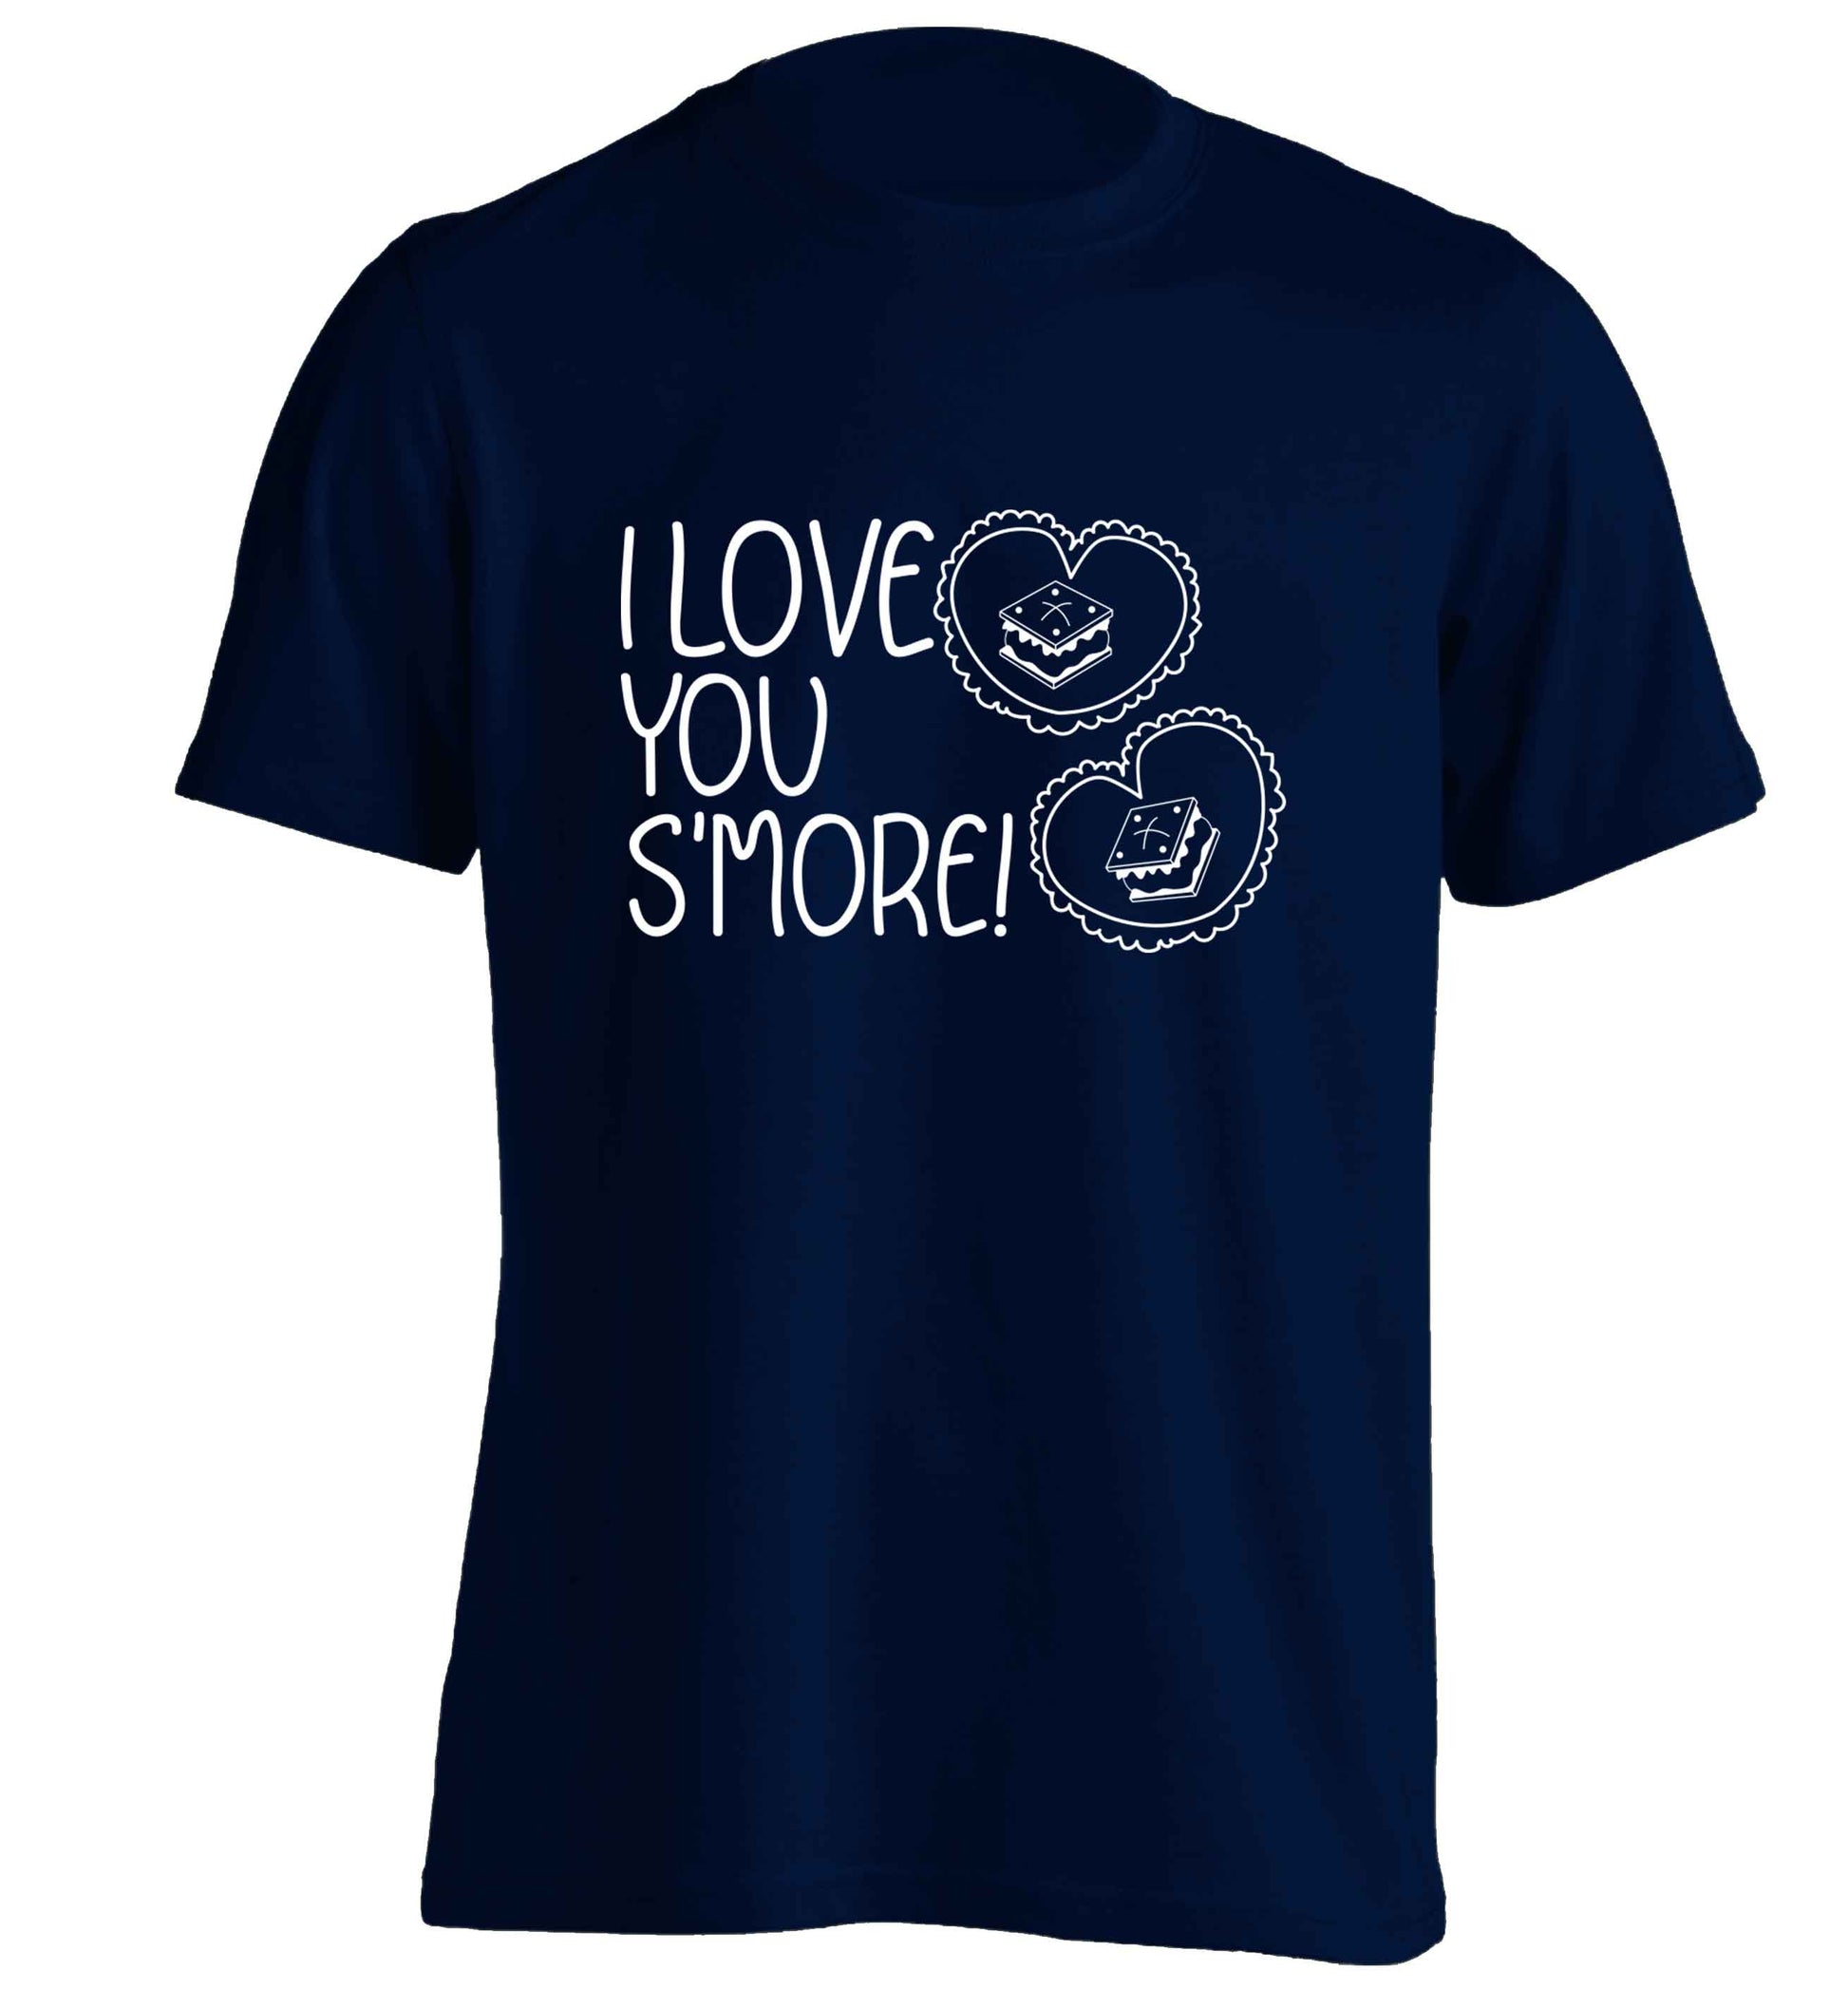 I love you s'more than anything adults unisex navy Tshirt 2XL